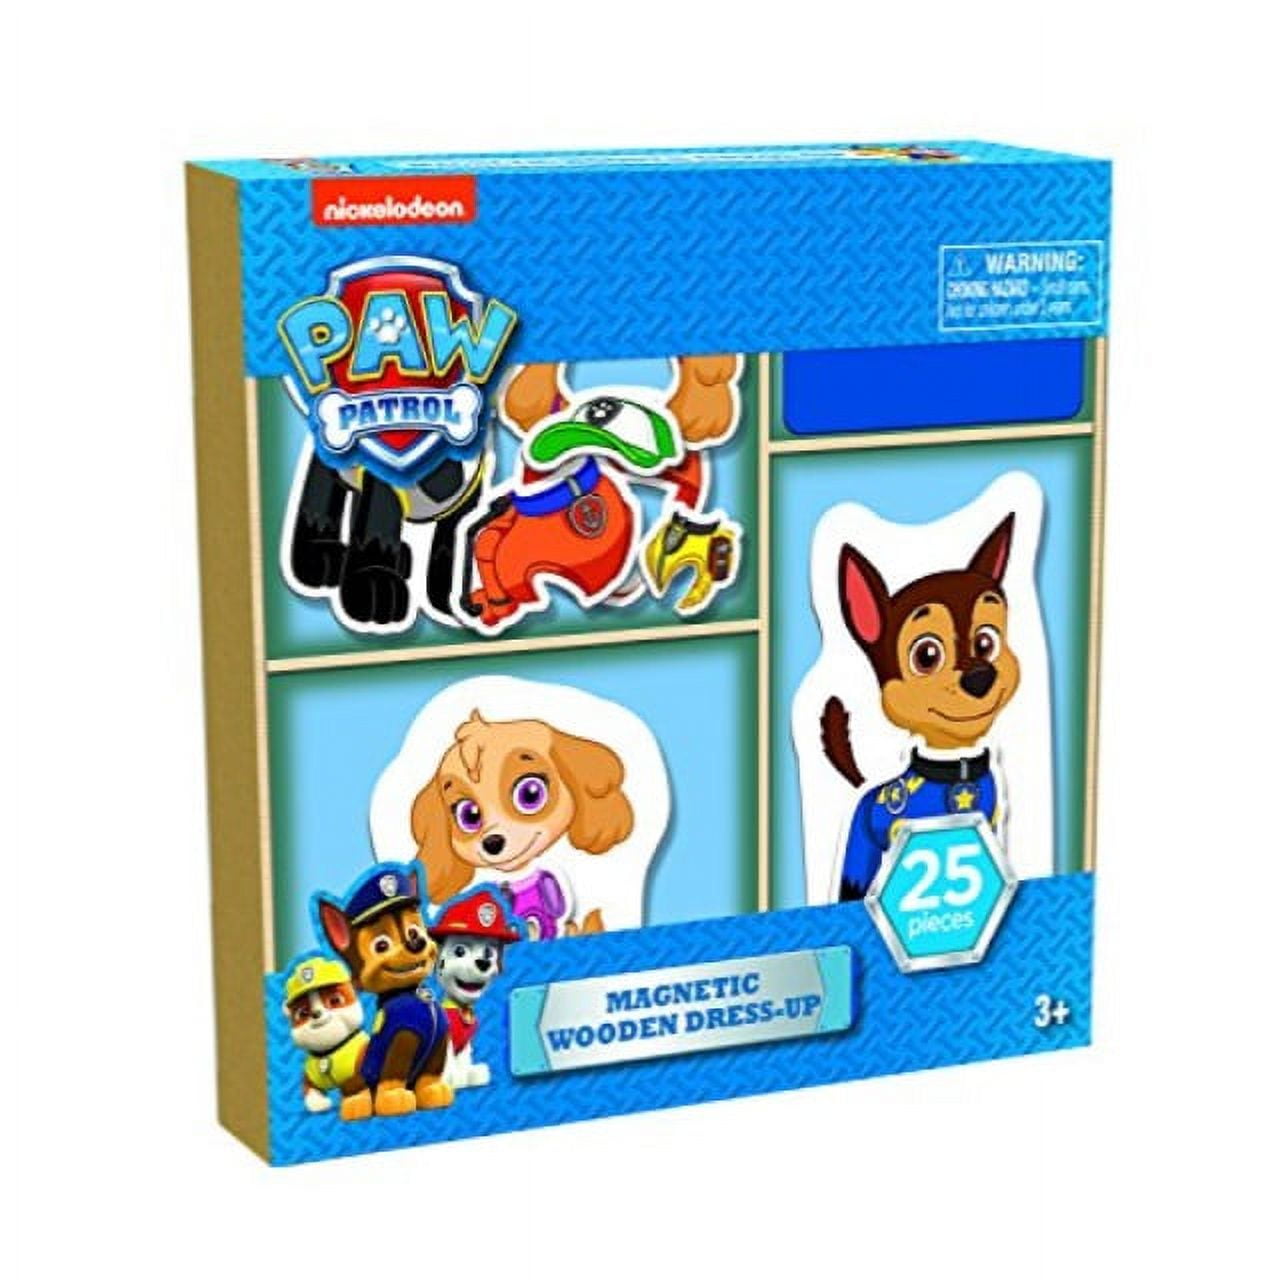 Paw Patrol 25 Dress Wood Puzzle Up Magnetic piece